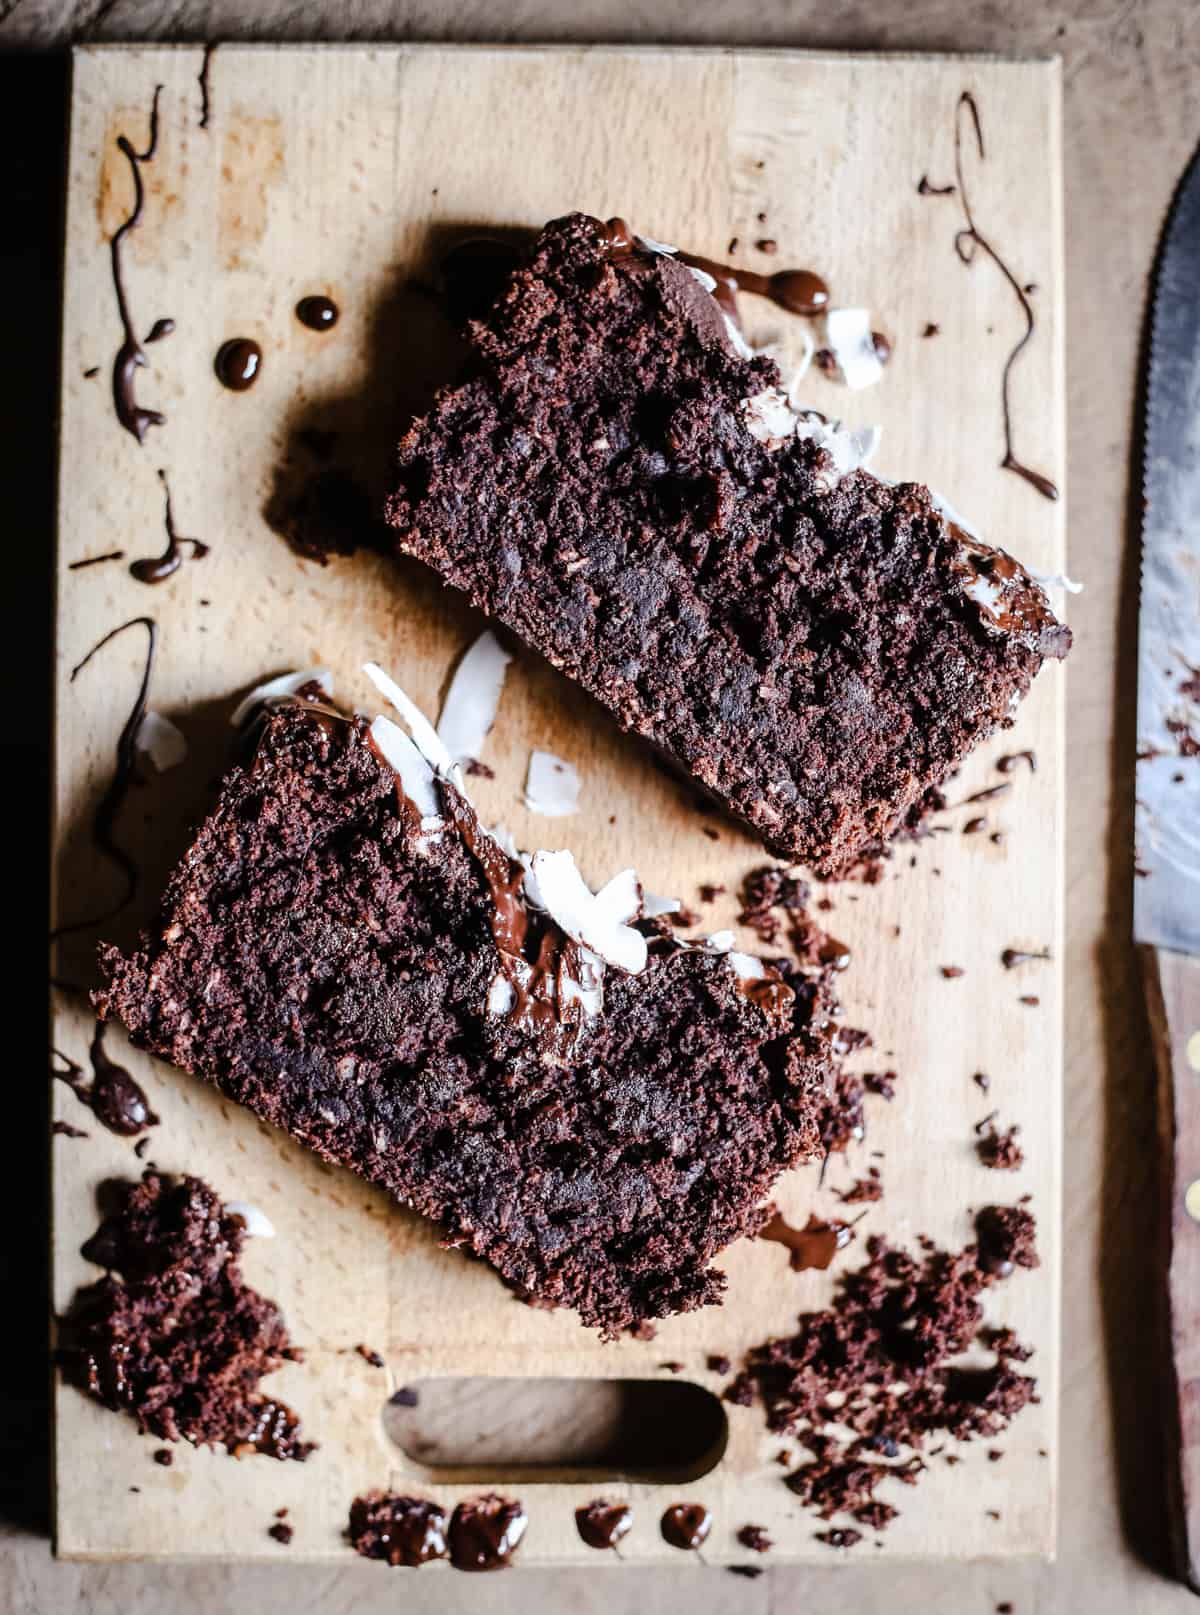 slices of Vegan Chocolate Coconut Banana Bread on a wooden board